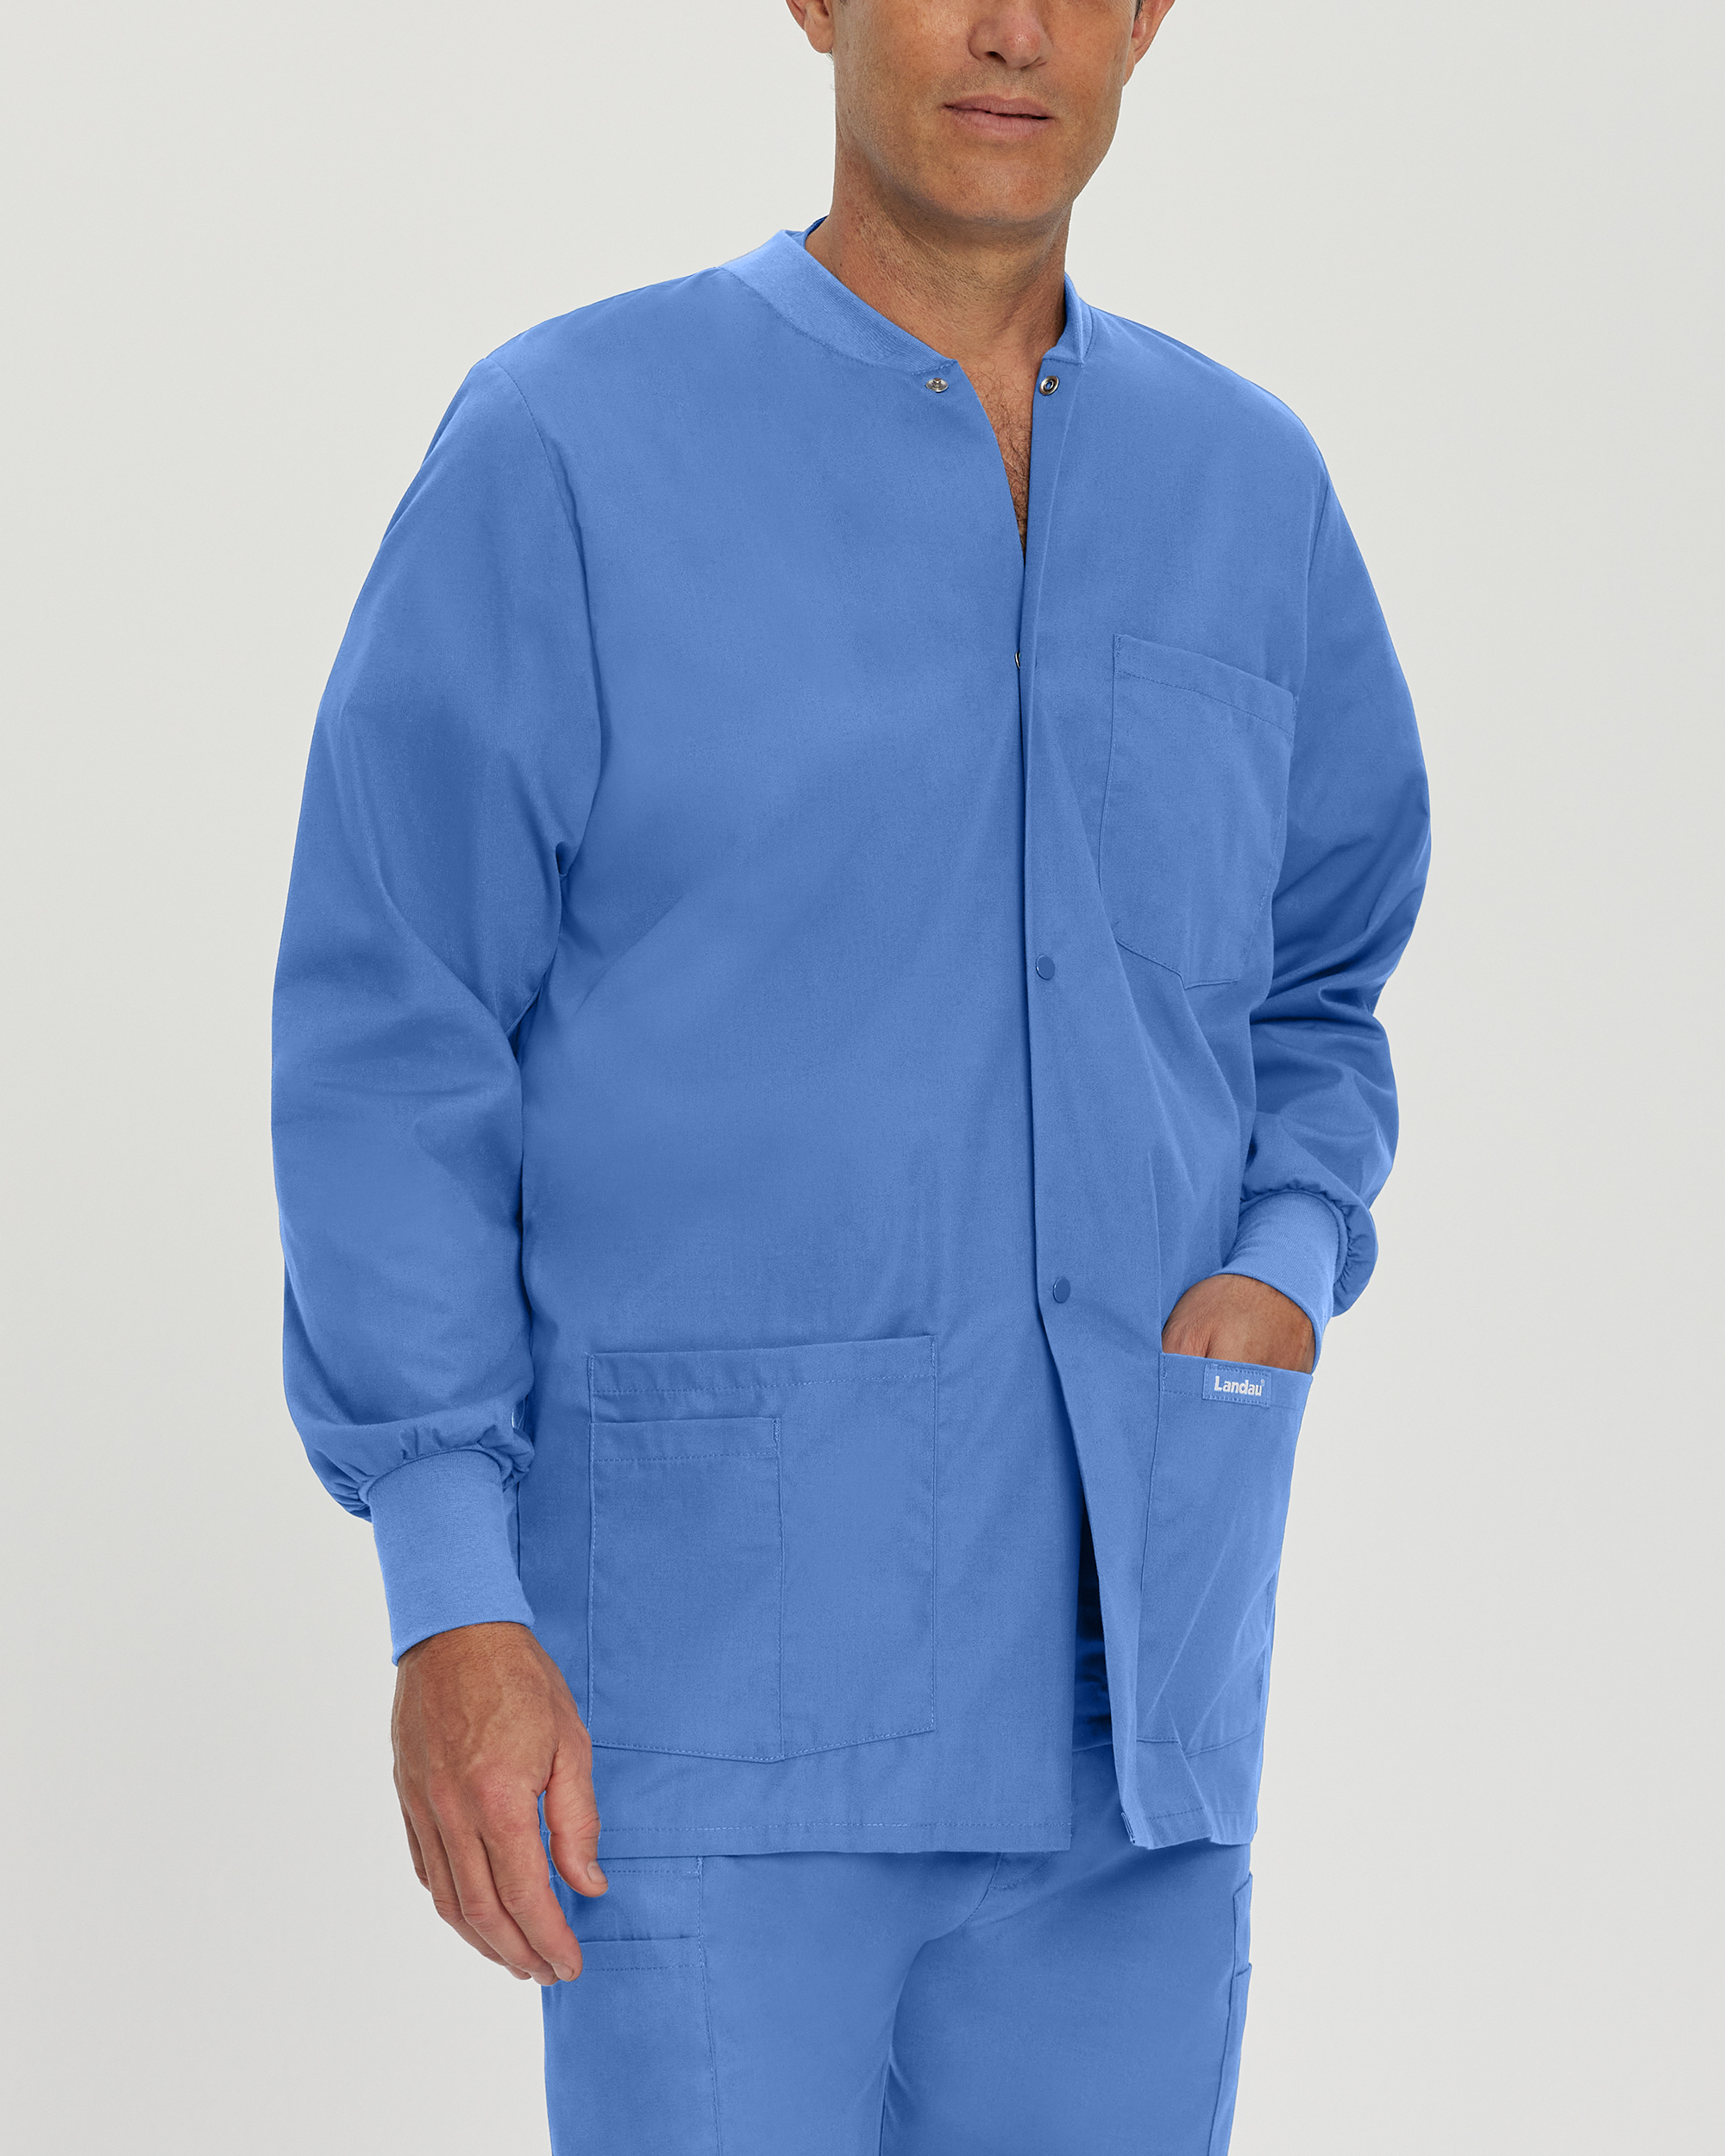 What material is the warm up scrub jacket made of?